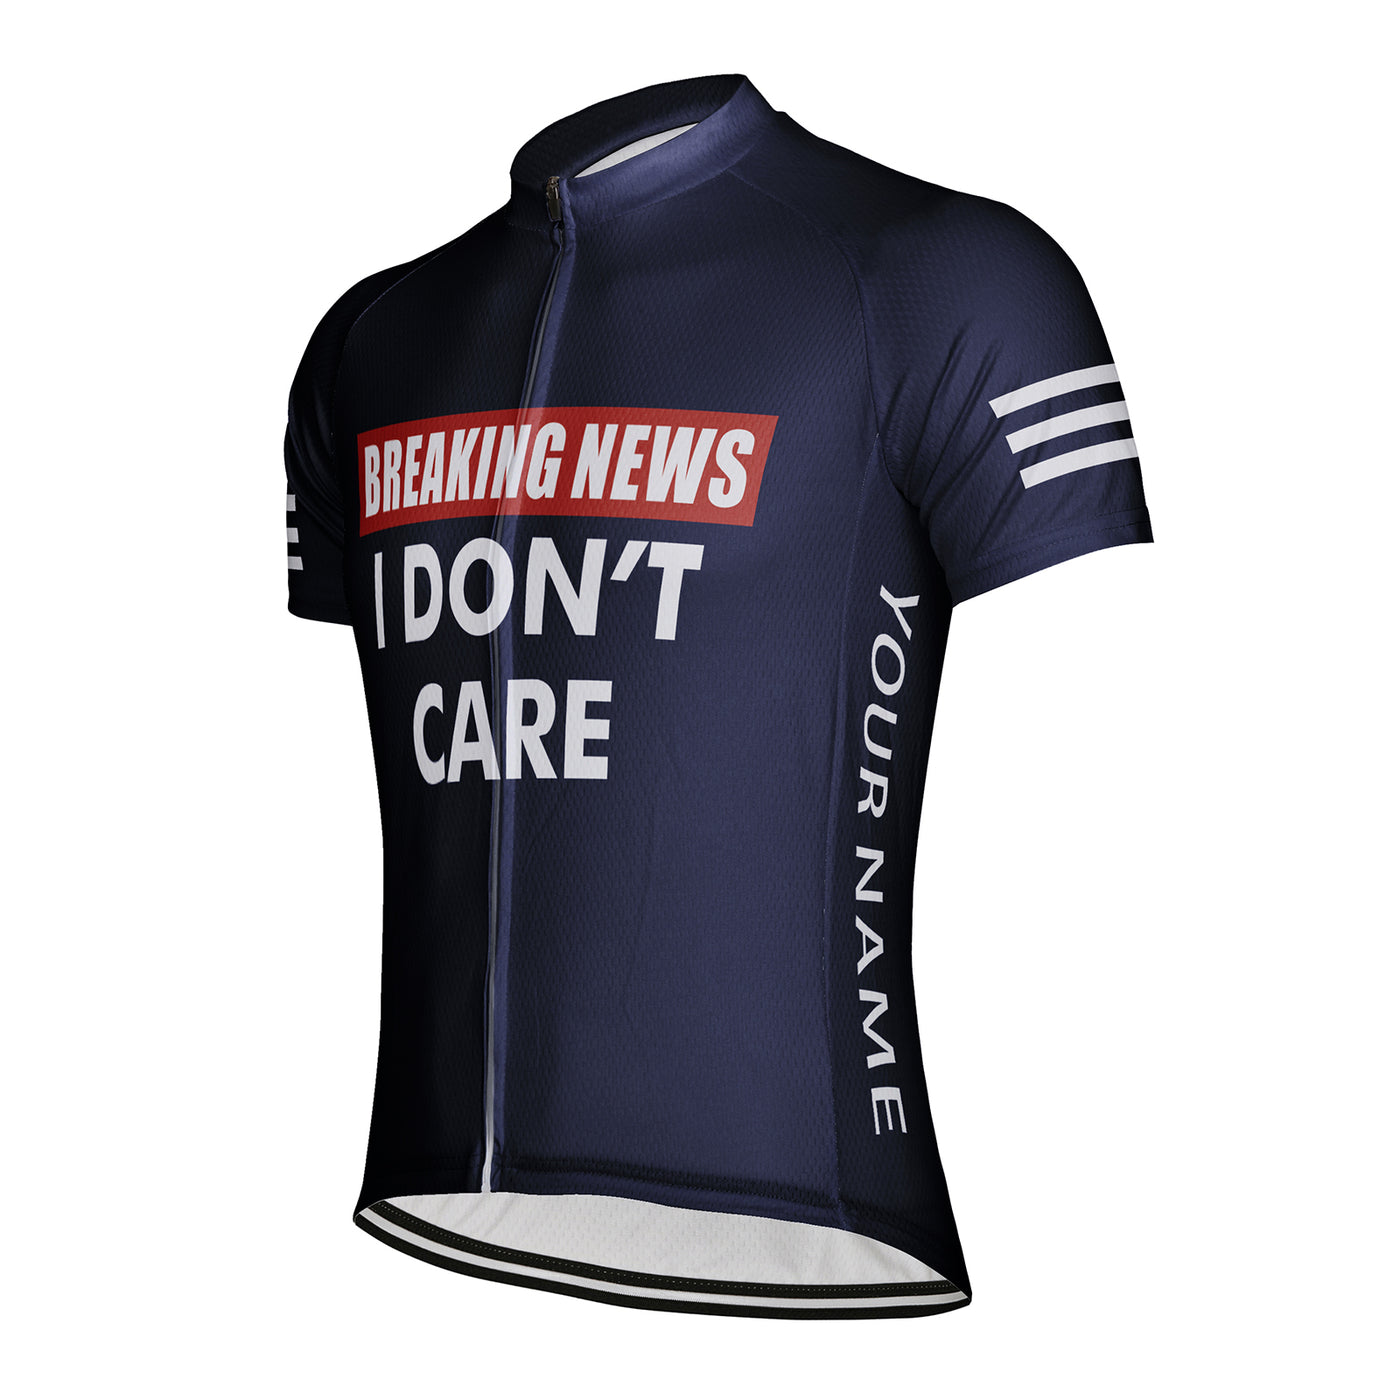 Customized Breaking News I Don't Care Men's Cycling Jersey Short Sleeve